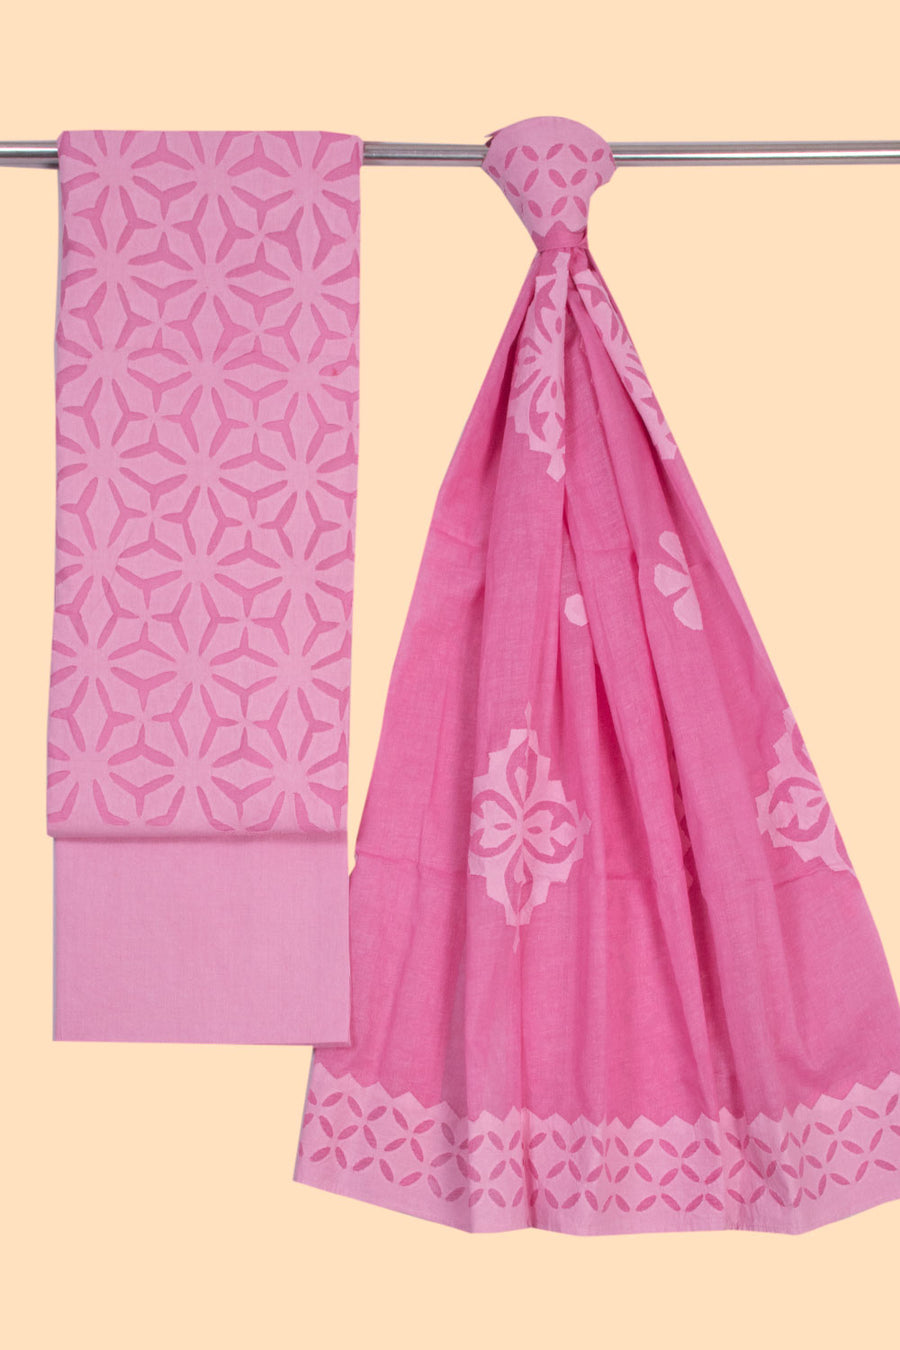 Pink Barmer Applique Embroidered Cotton 3 Piece Salwar Suit Material 10070140